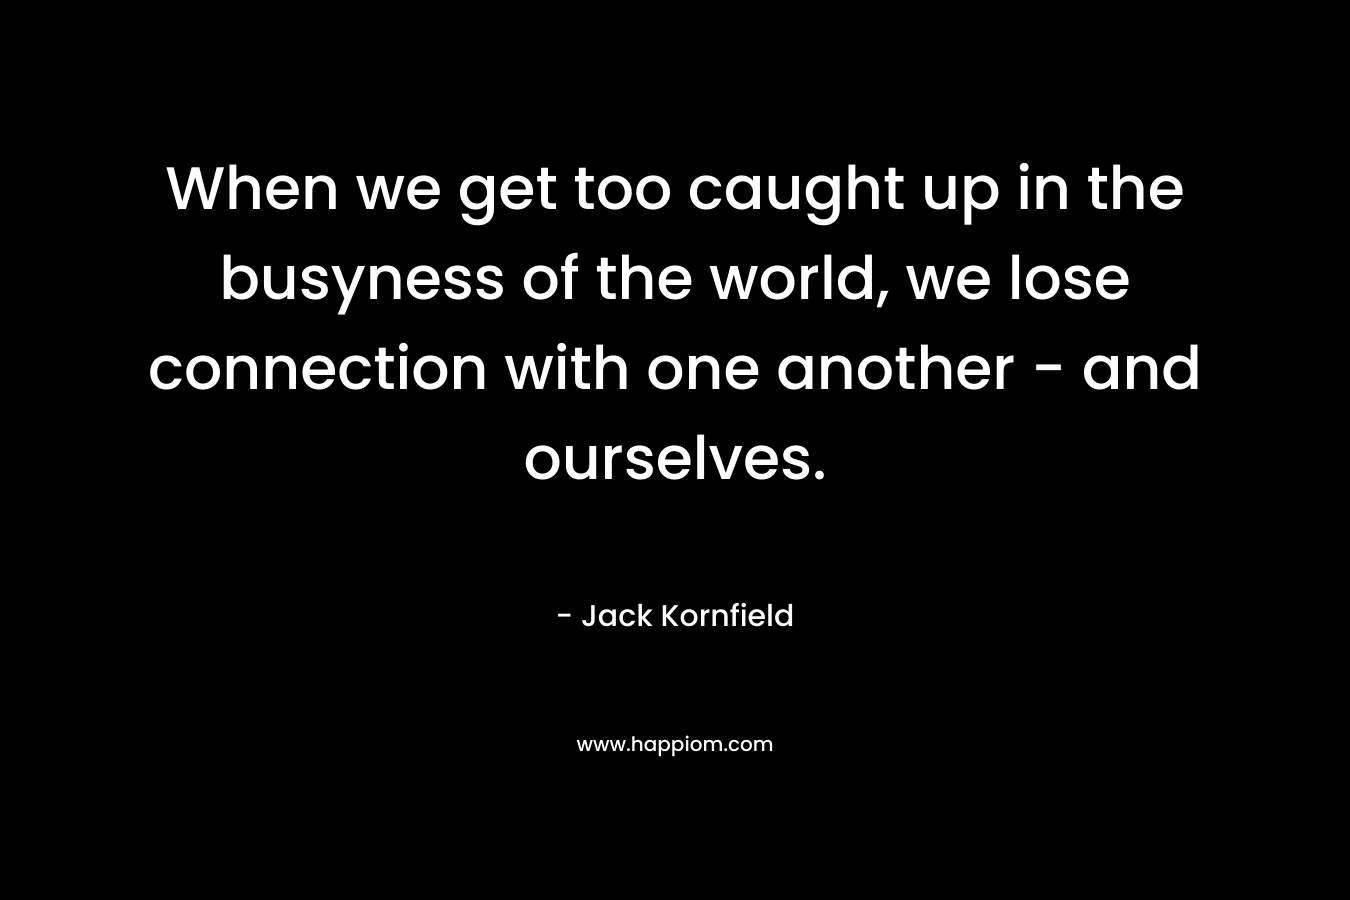 When we get too caught up in the busyness of the world, we lose connection with one another – and ourselves. – Jack Kornfield